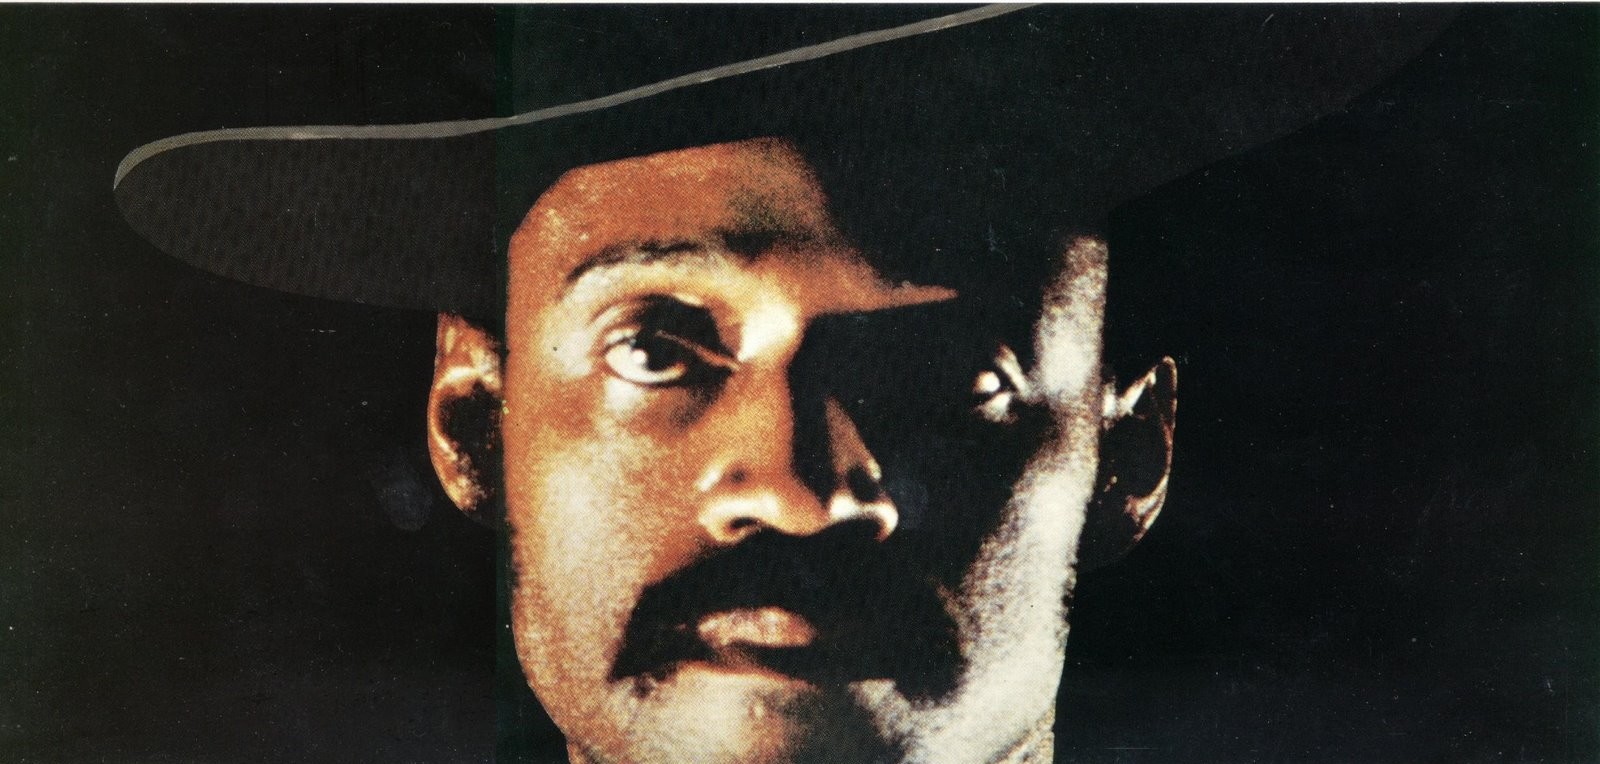 sweetback-front-cover-e1360739015602